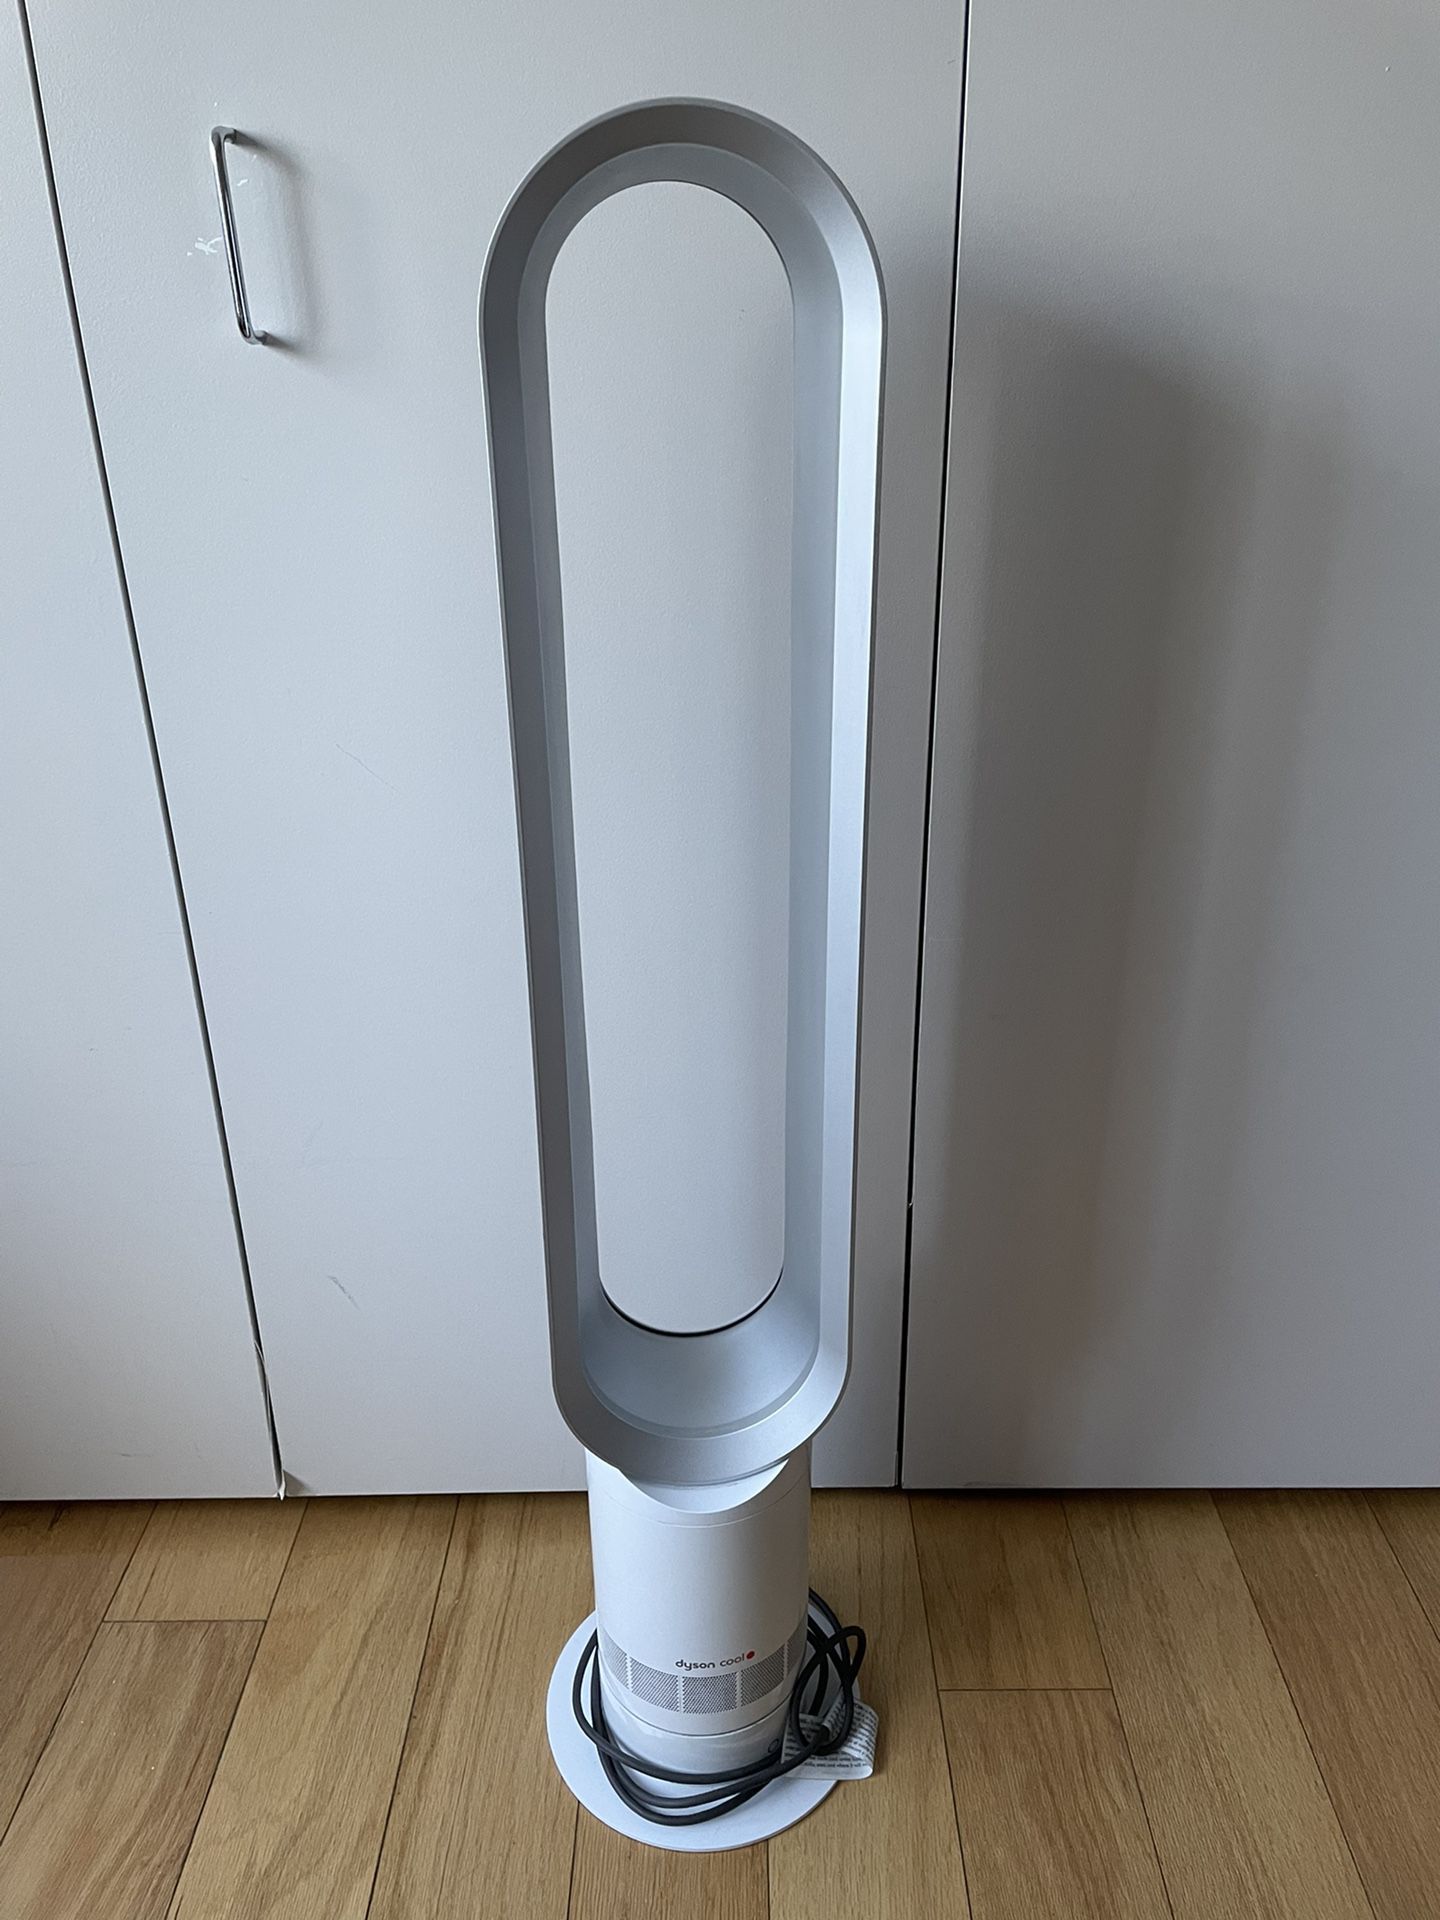 Cool AM07 Tower Fan + Remote for Sale New York, NY - OfferUp